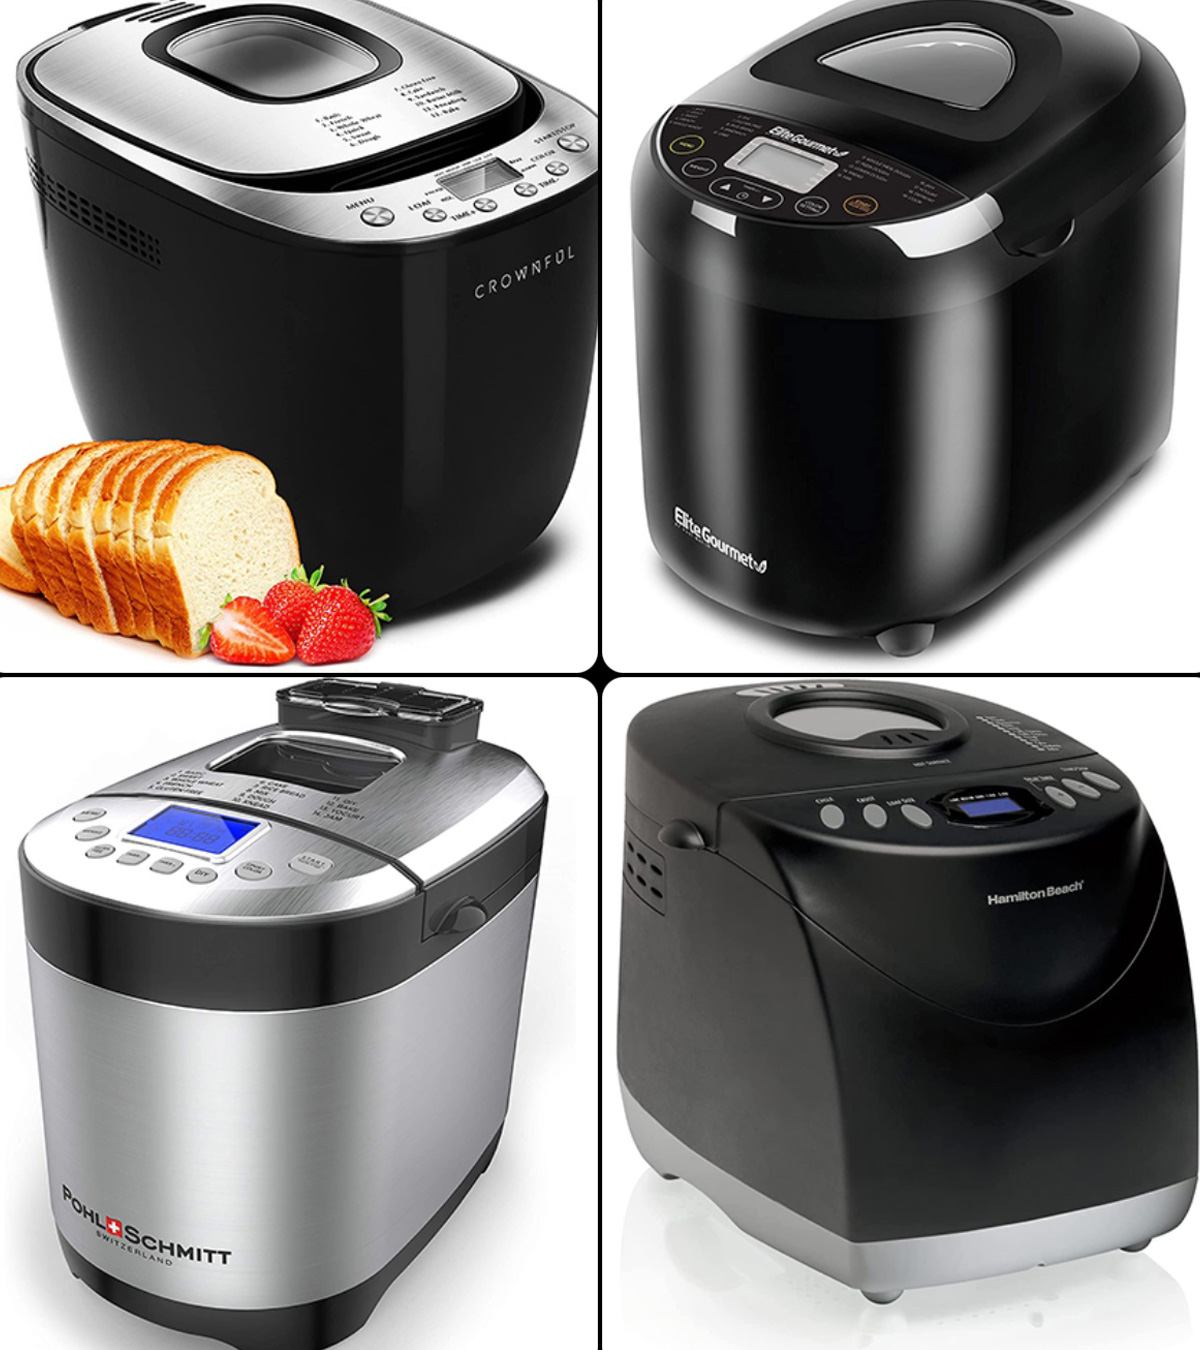 Best Bread Machines - 2022 Buyer's Guide & Reviews - Dishcrawl